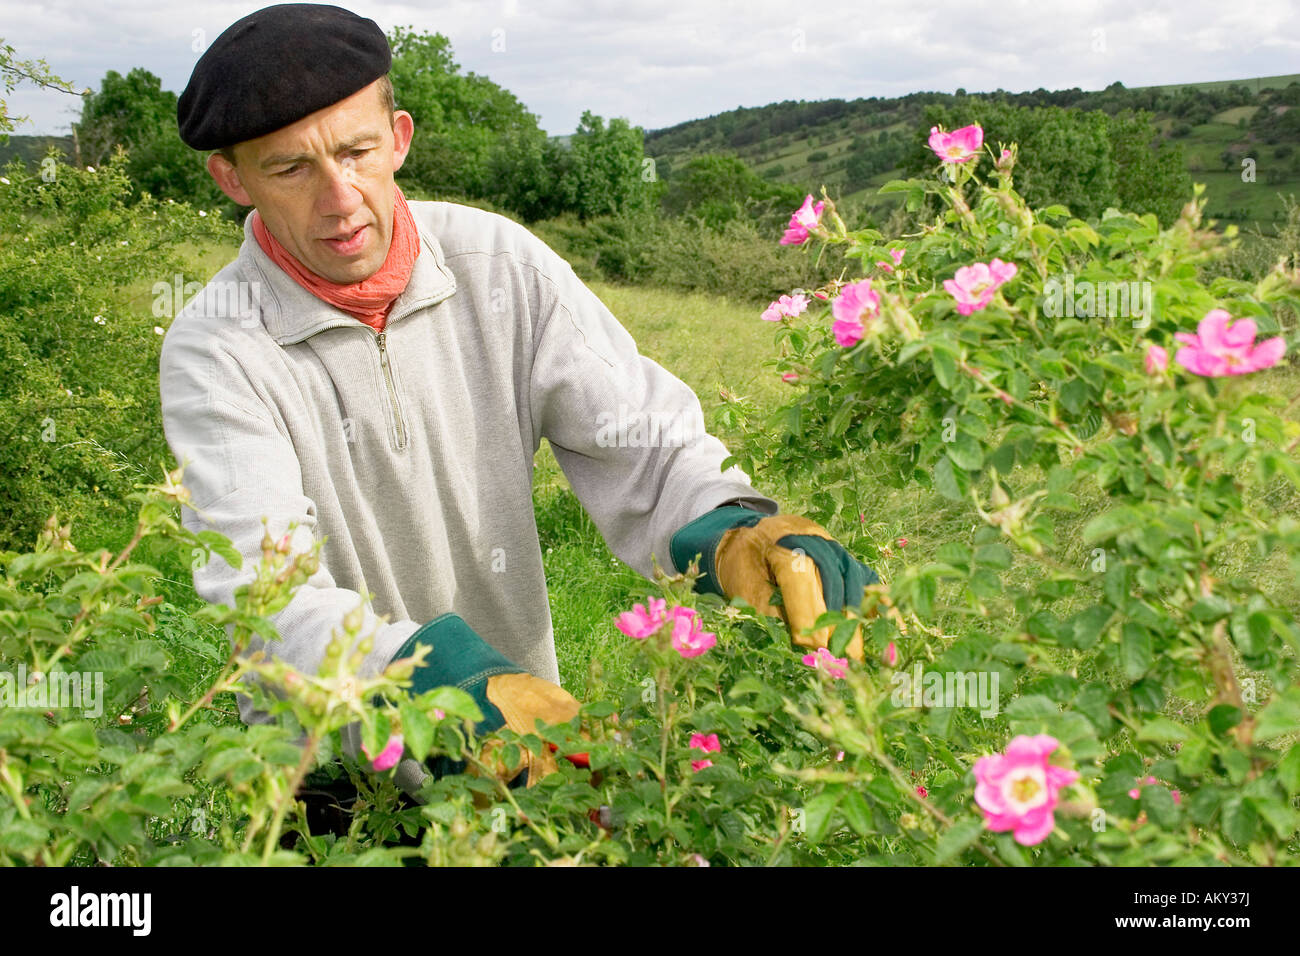 Harvesting wild roses for the production of natural cosmetic and remedies, Credlingen, Bavaria, Germany Stock Photo